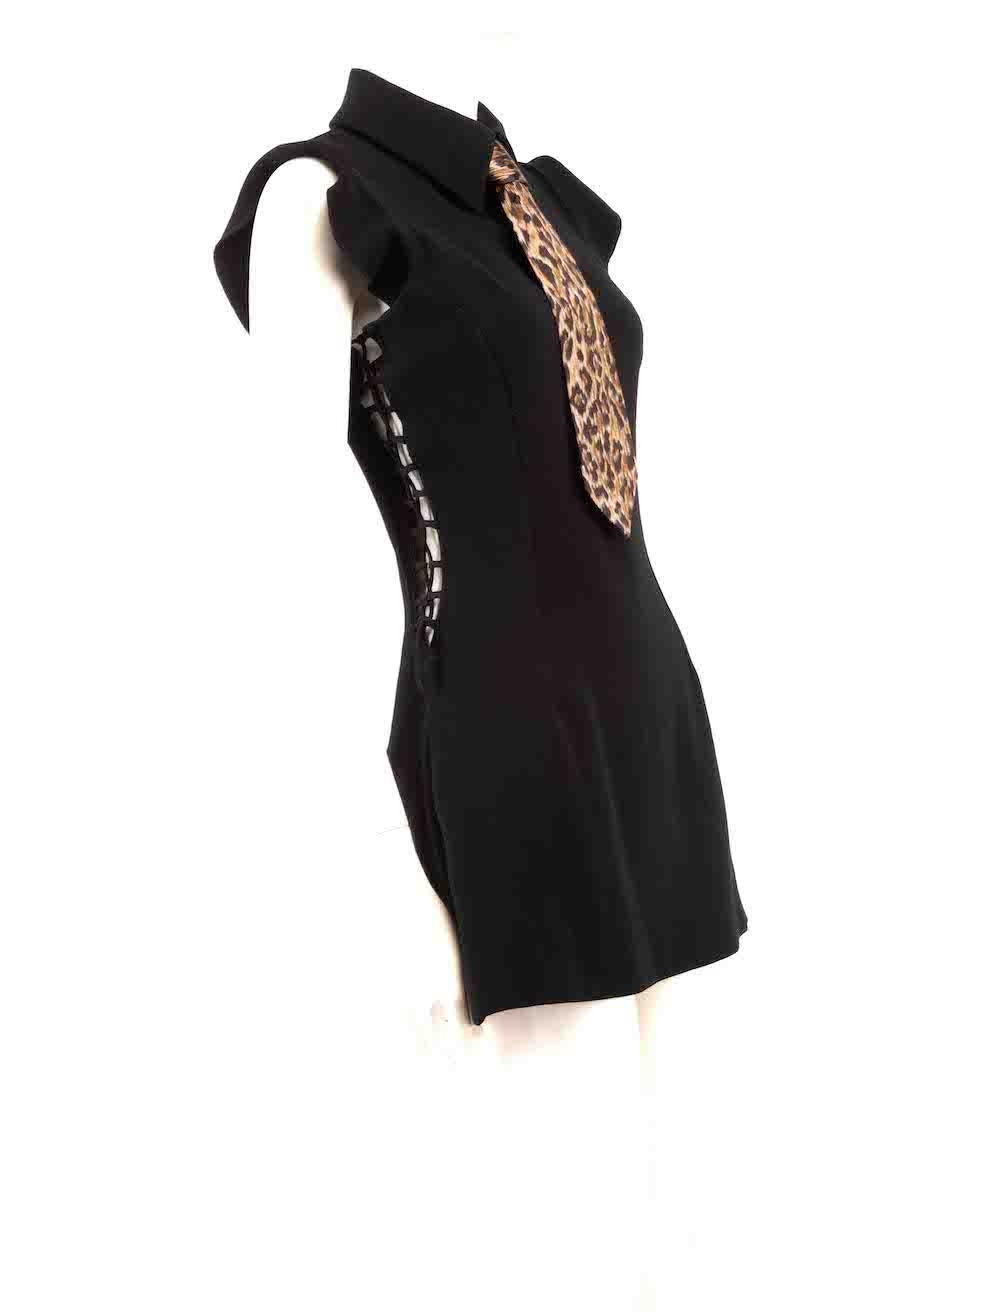 CONDITION is Good. Minor wear to dress is evident. Light wear to shoulder and underarm linings with discoloured marks on this used Dolce & Gabbana designer resale item.
 
 
 
 Details
 
 
 Black
 
 Polyester
 
 Dress
 
 Mini
 
 Sleeveless
 
 Leopard